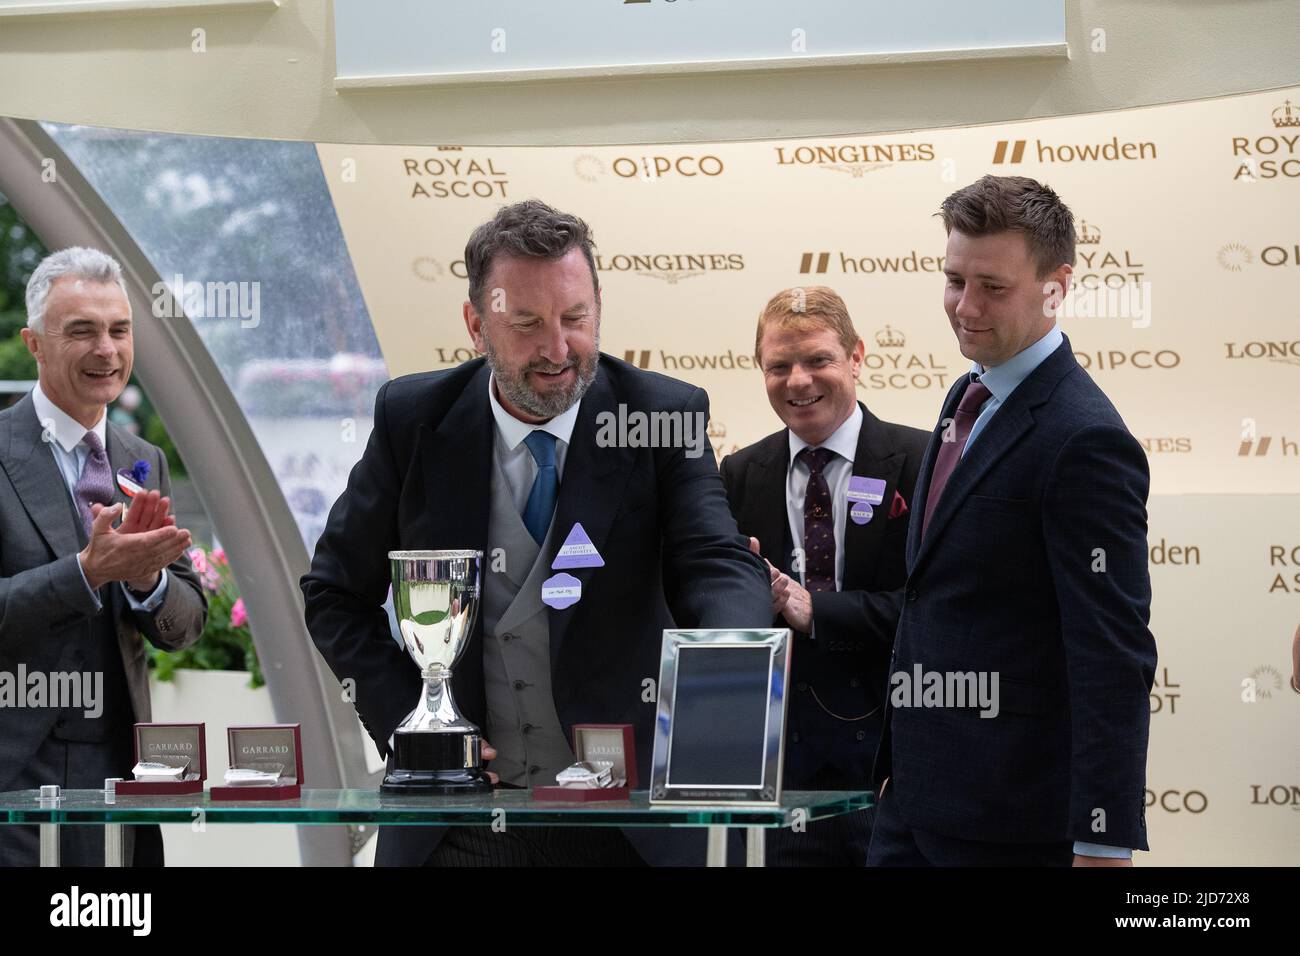 Ascot, Berkshire, UK. 18th June, 2022. Horse Missed the Cut ridden by jockey James McDonald won the Golden Gates Stakes race at Royal Ascot today. Owner Ed Babington. Trainer George Boughey. Comedian Lee Mack who appears in the comedy Not Going Out made the presentation to the winning owners and trainer. Credit: Maureen McLean/Alamy Live News Stock Photo